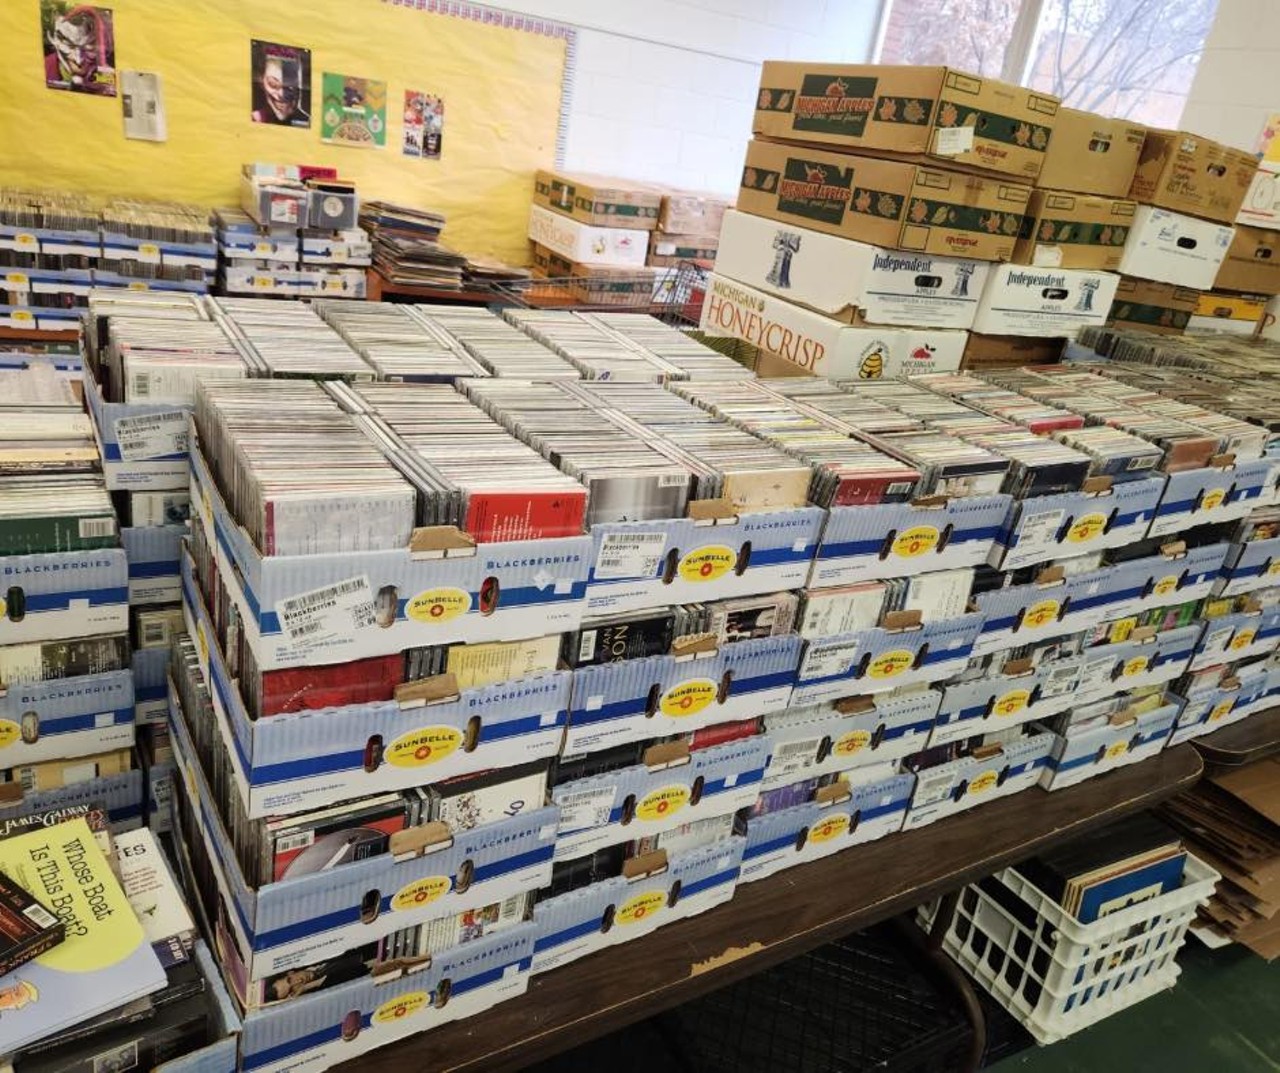 
Bookstock Used Book and Media Sale
When: April 7 from 8:15 a.m.-6 p.m.
Where: Laurel Park Place (Livonia)
What: A used book and media sale
Who: Local book and media lovers
Why: Bookstock has 400,000-plus used books, DVDs, CDs, audiobooks, and vinyl for sale at affordable prices. All proceeds benefit literacy and education projects throughout metro Detroit.